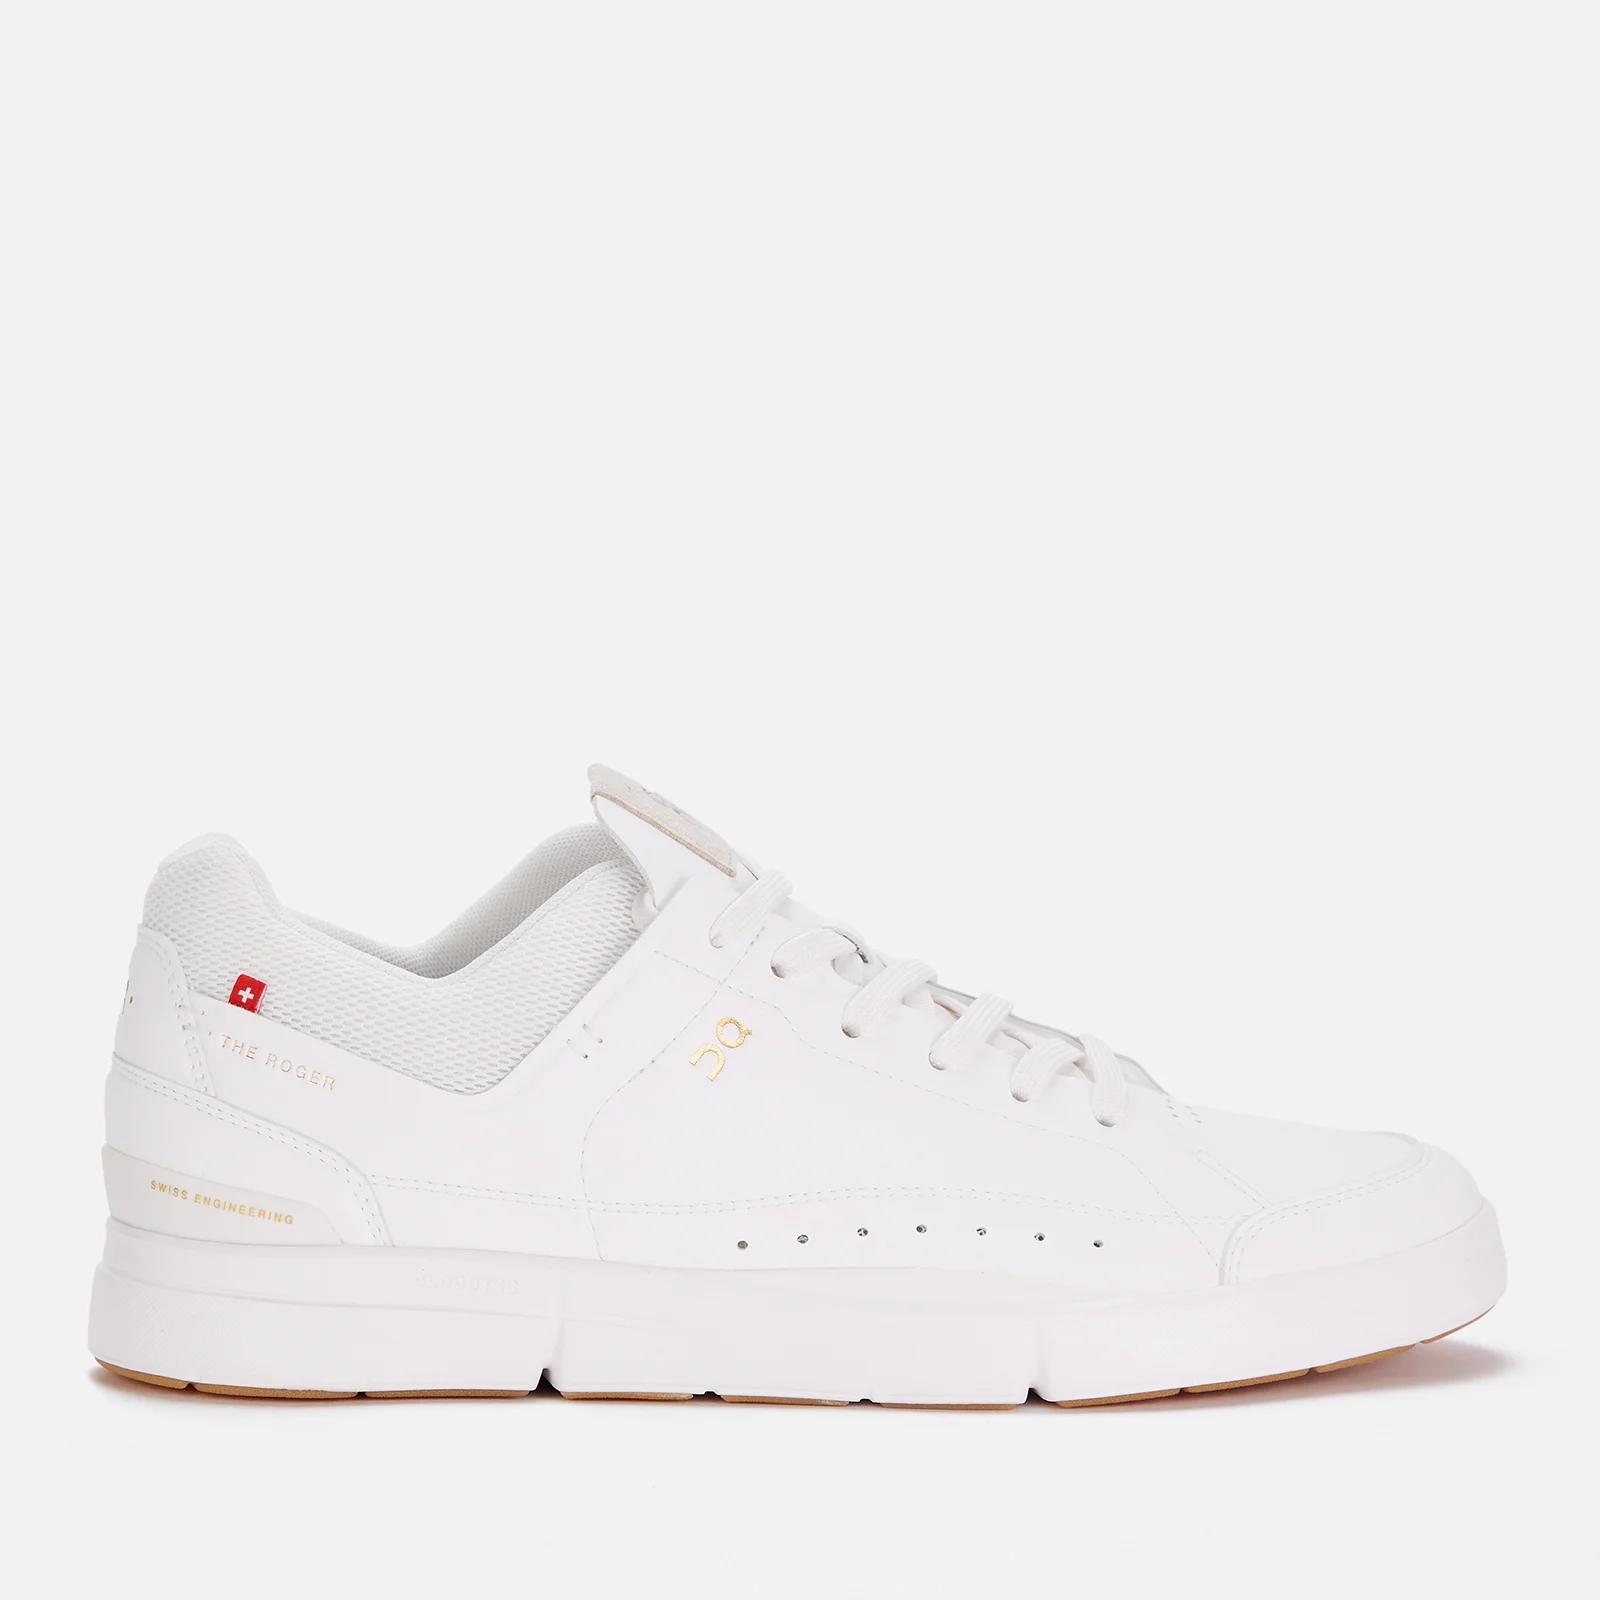 ON Men's The Roger Centre Court Trainers - White/Gum Image 1